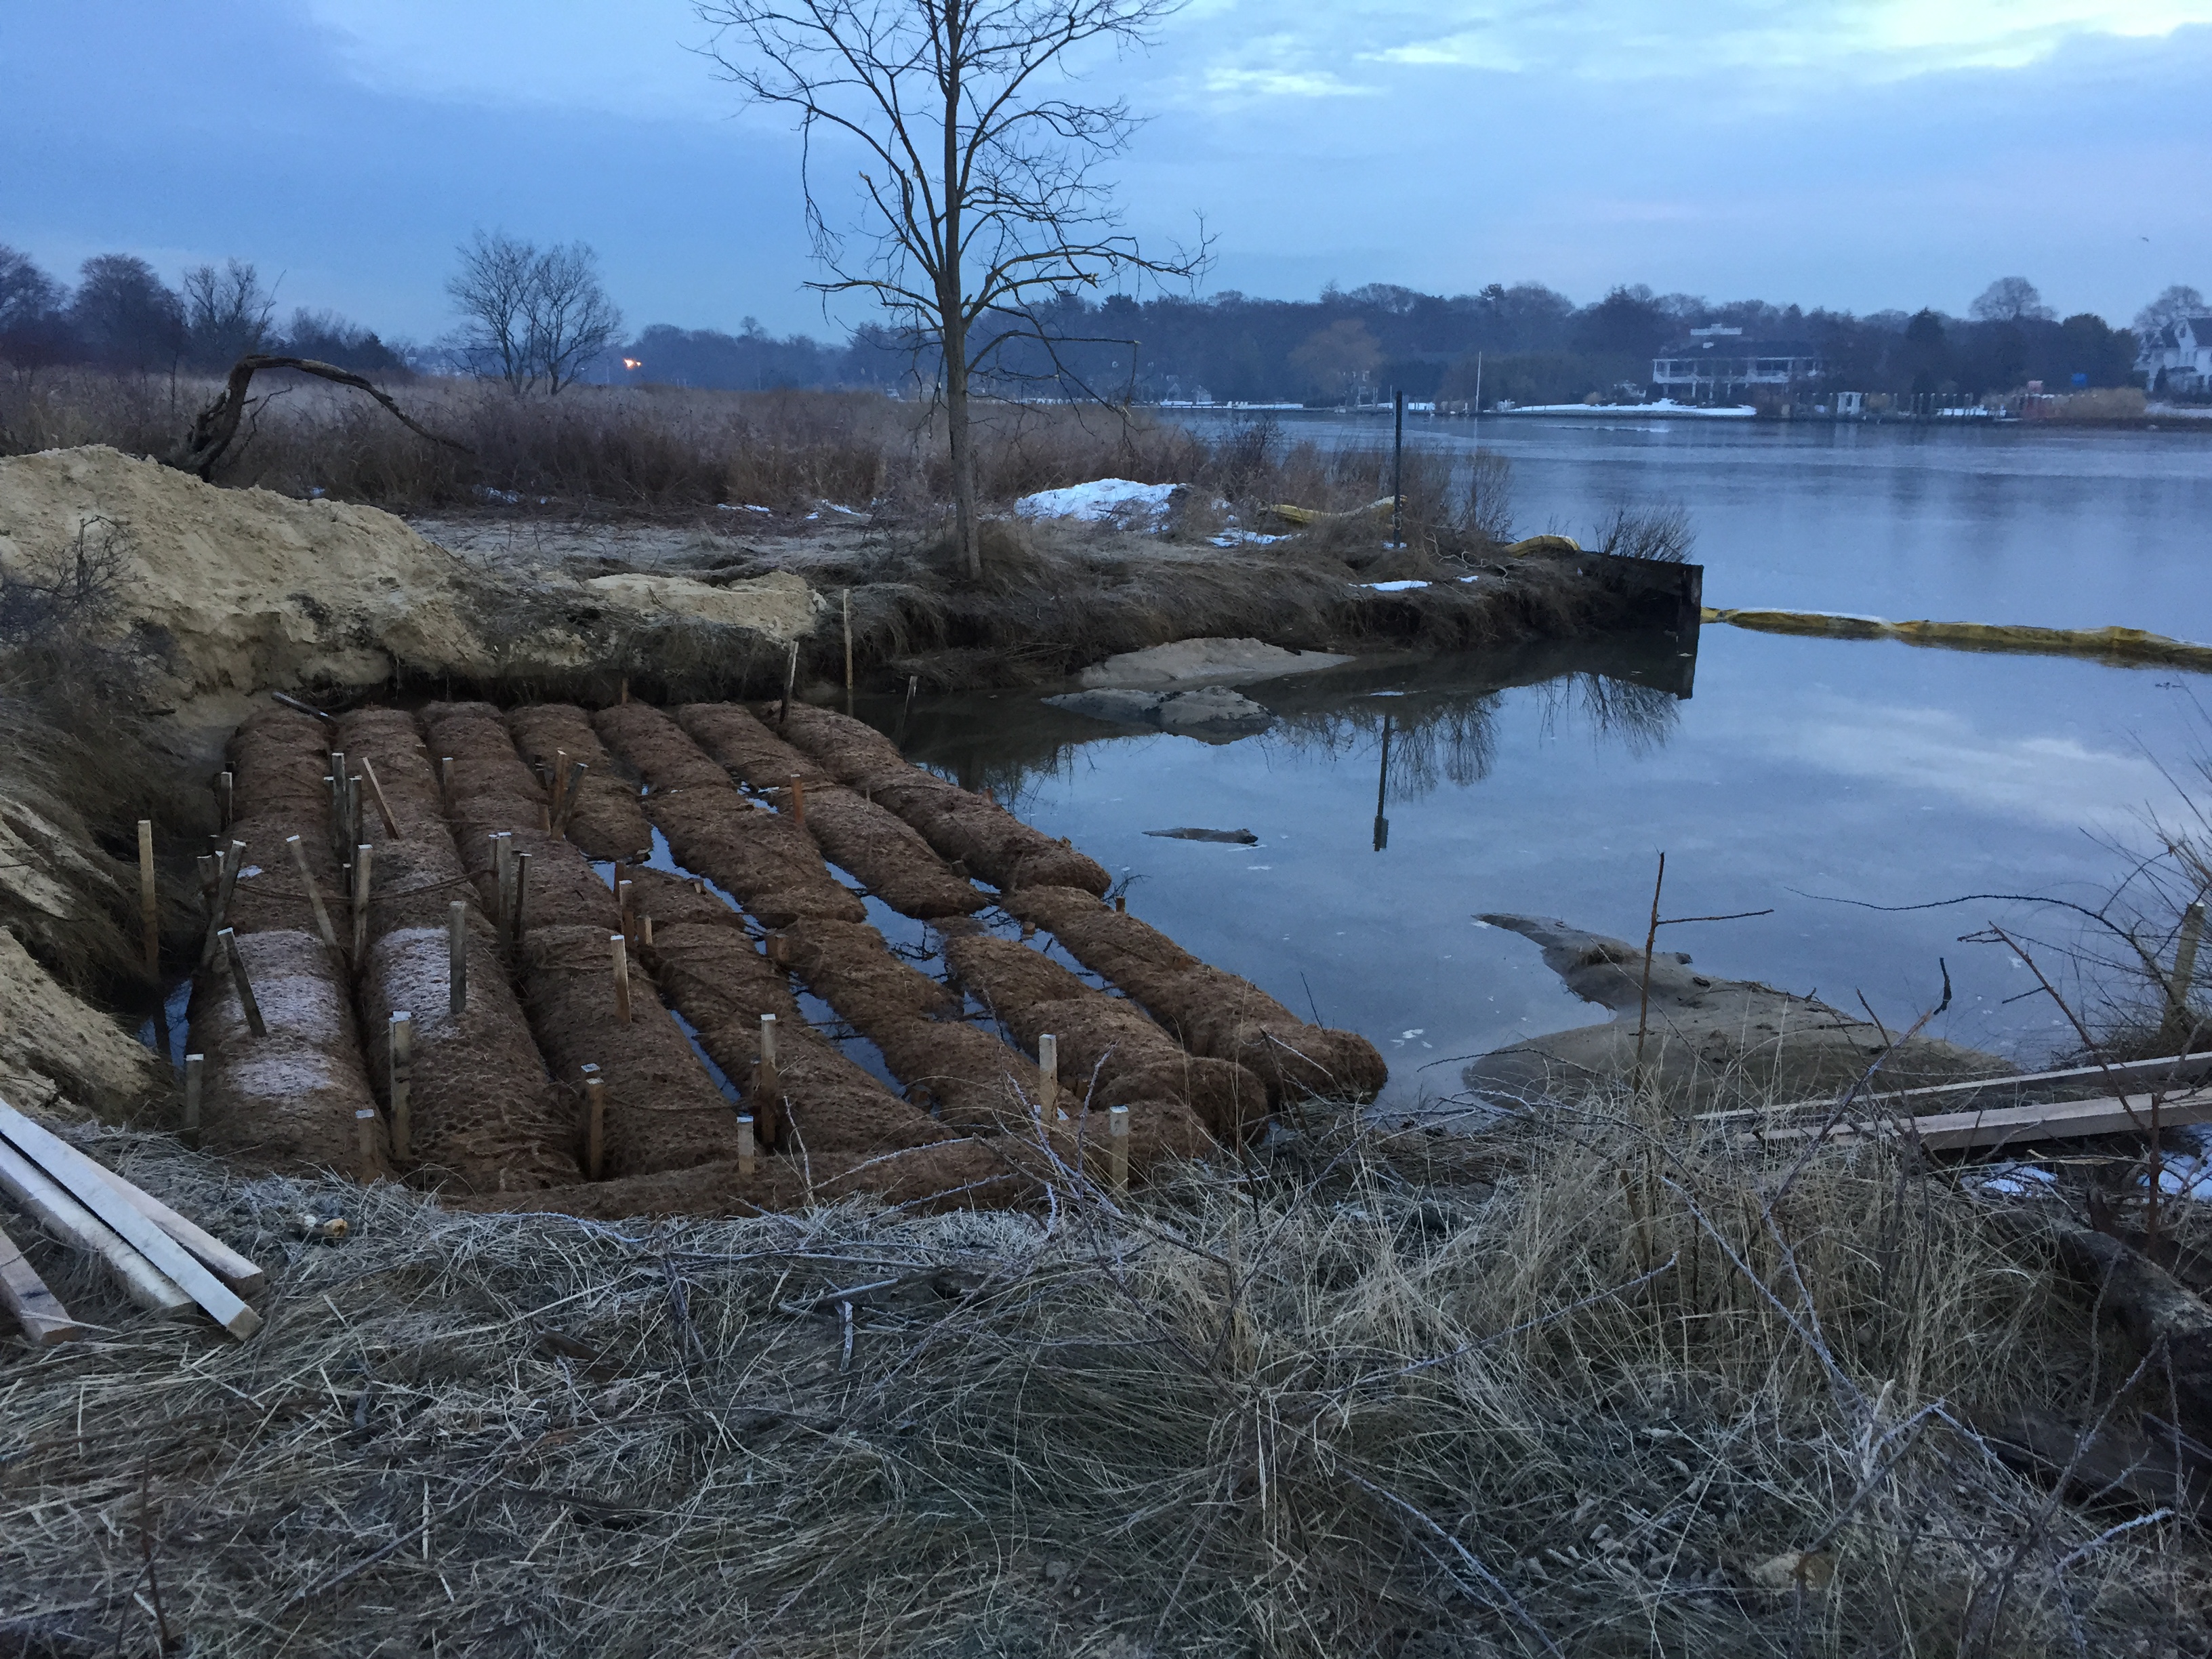 Coir logs placed in open water to restore marsh